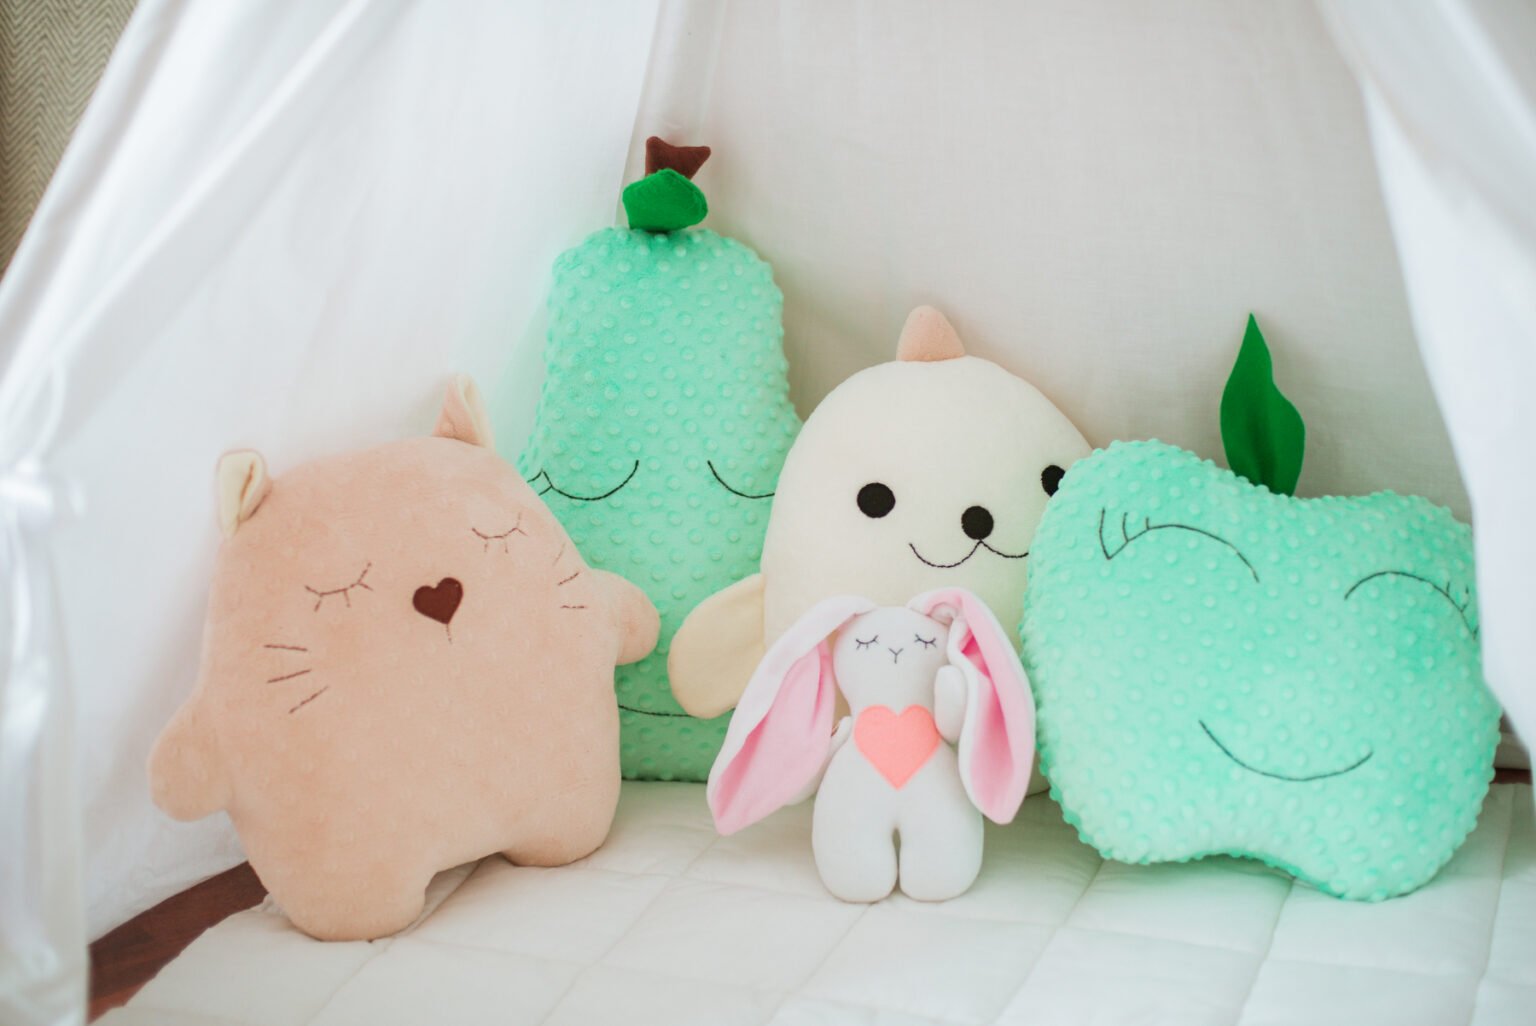 Rarest Multicolored Squishmallows on a Bed